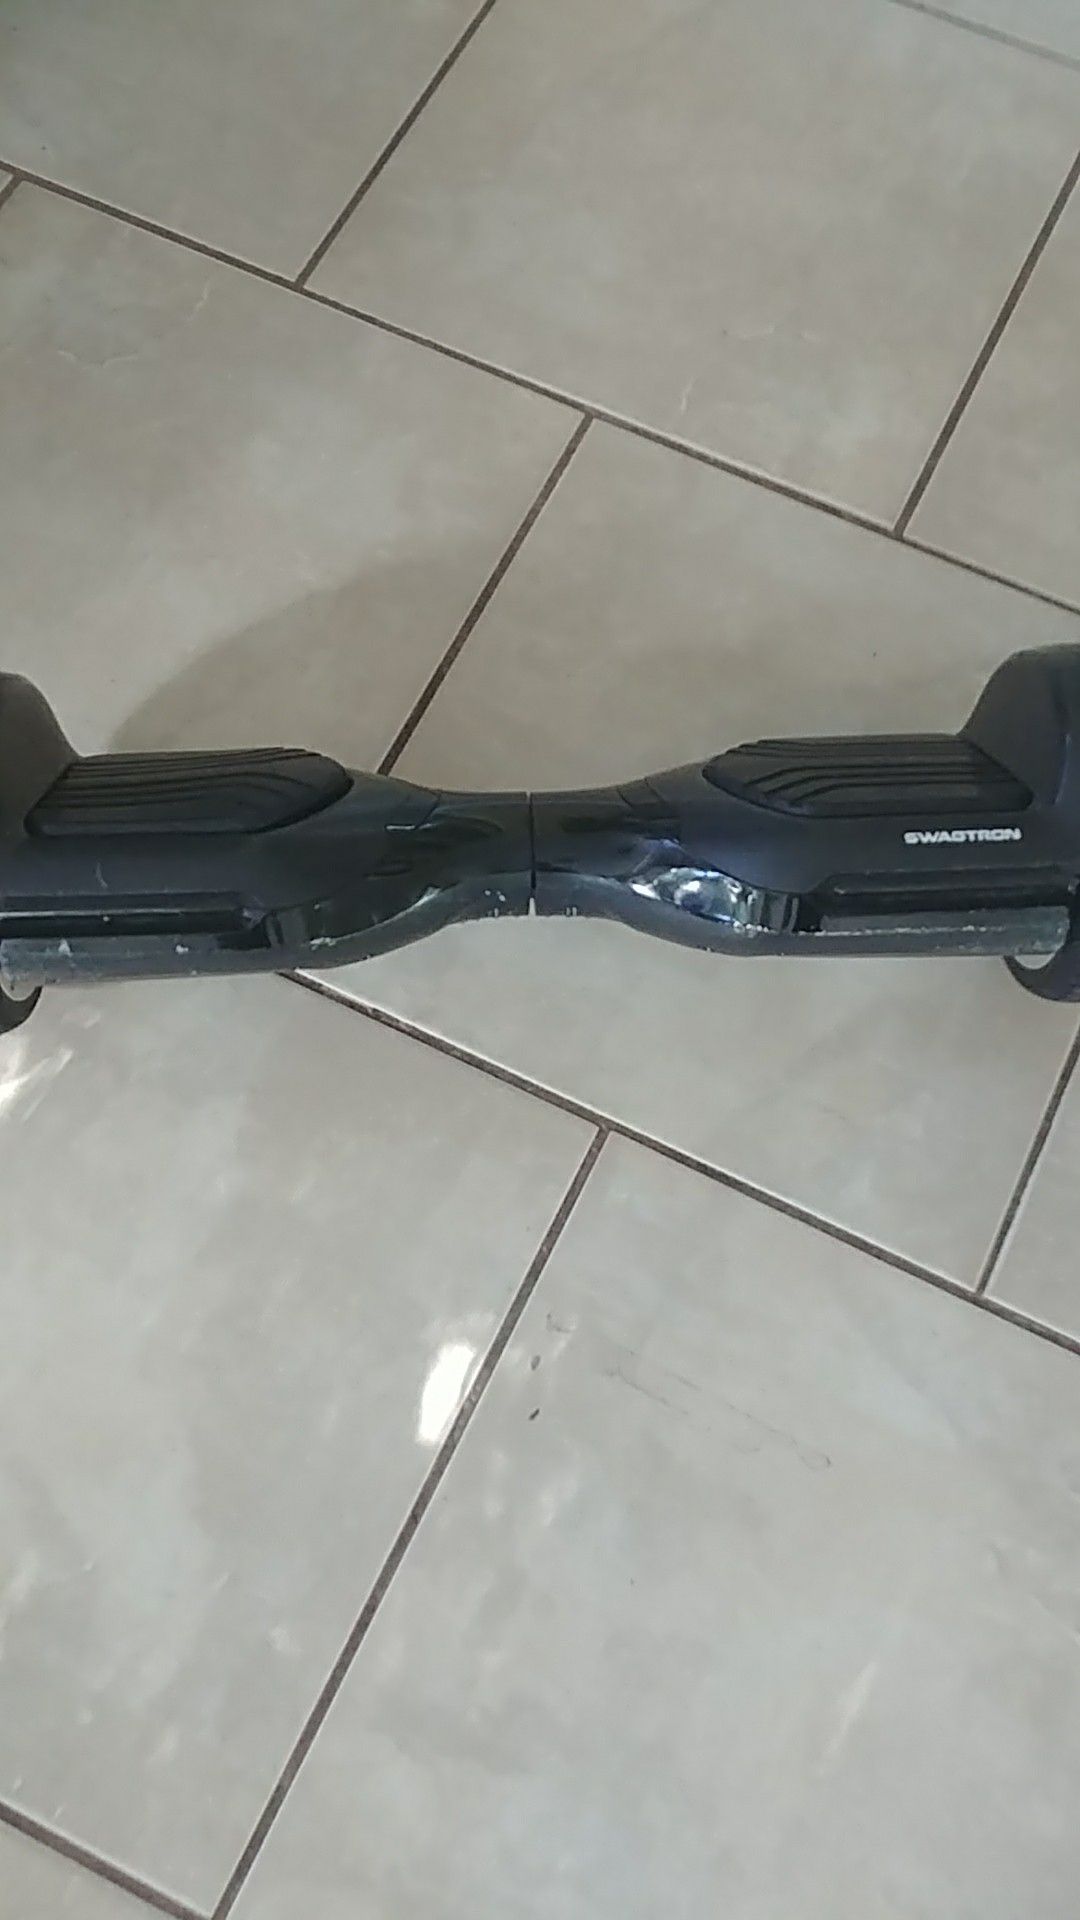 Swagtron hoverboard(scuffed but works great)